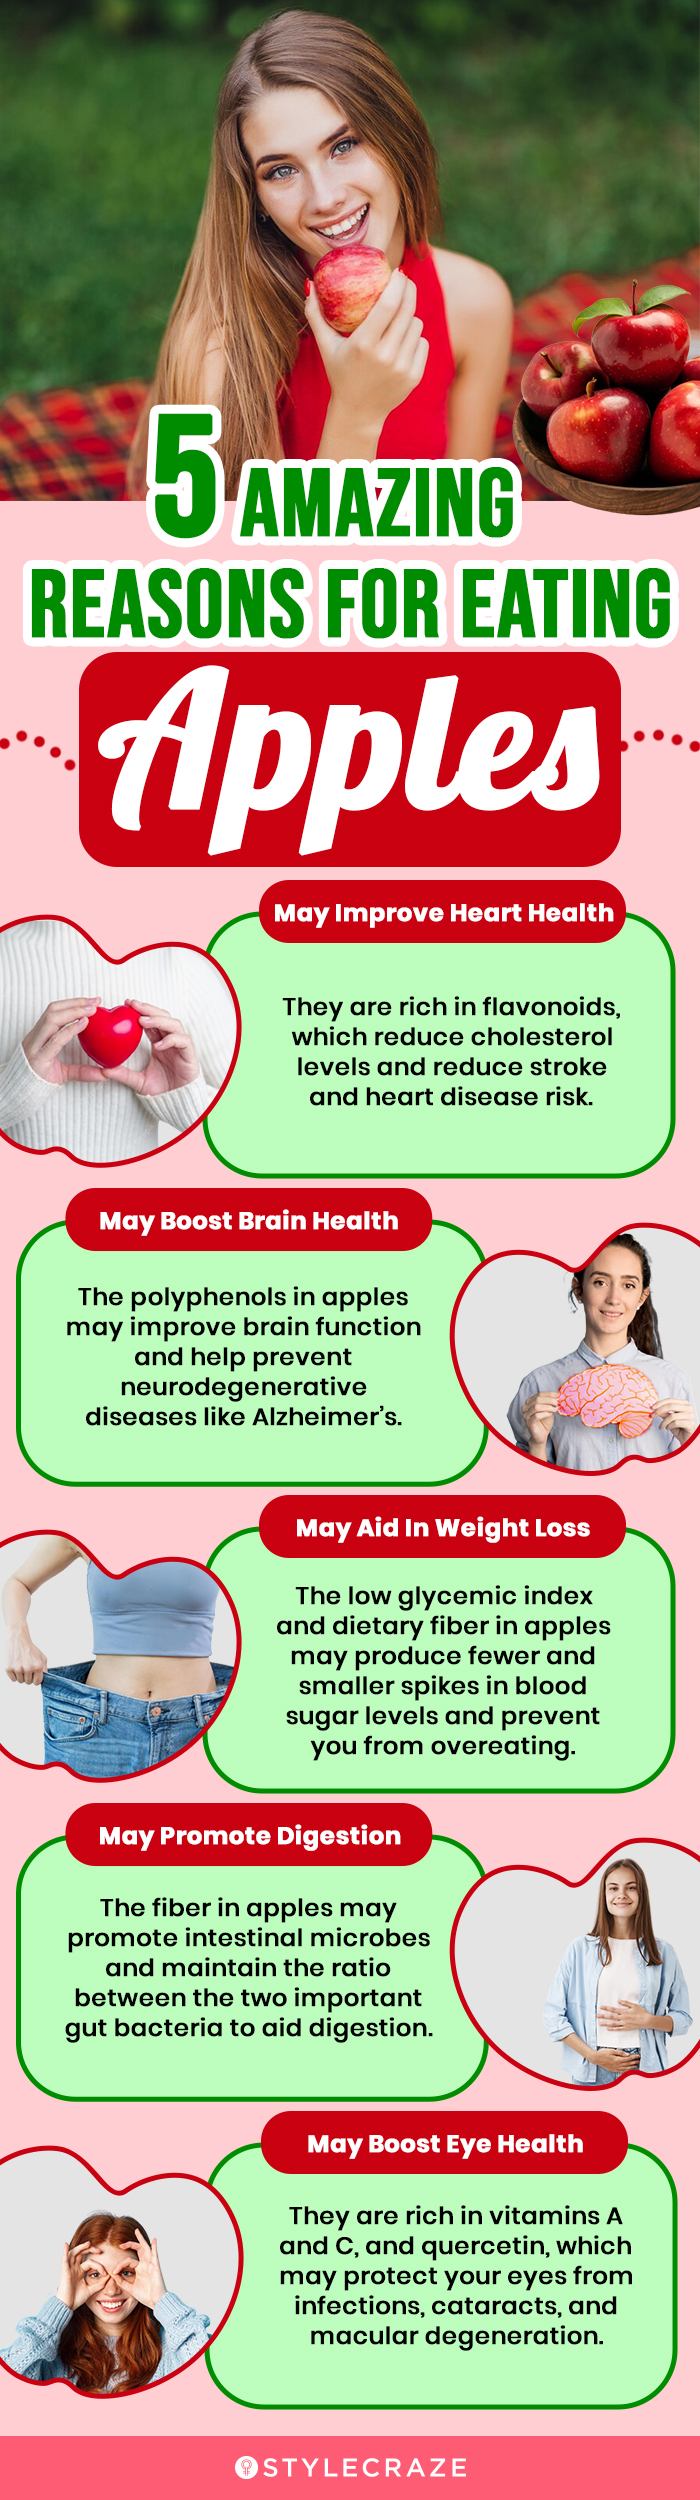 5 amazing reasons for eating apples (infographic)